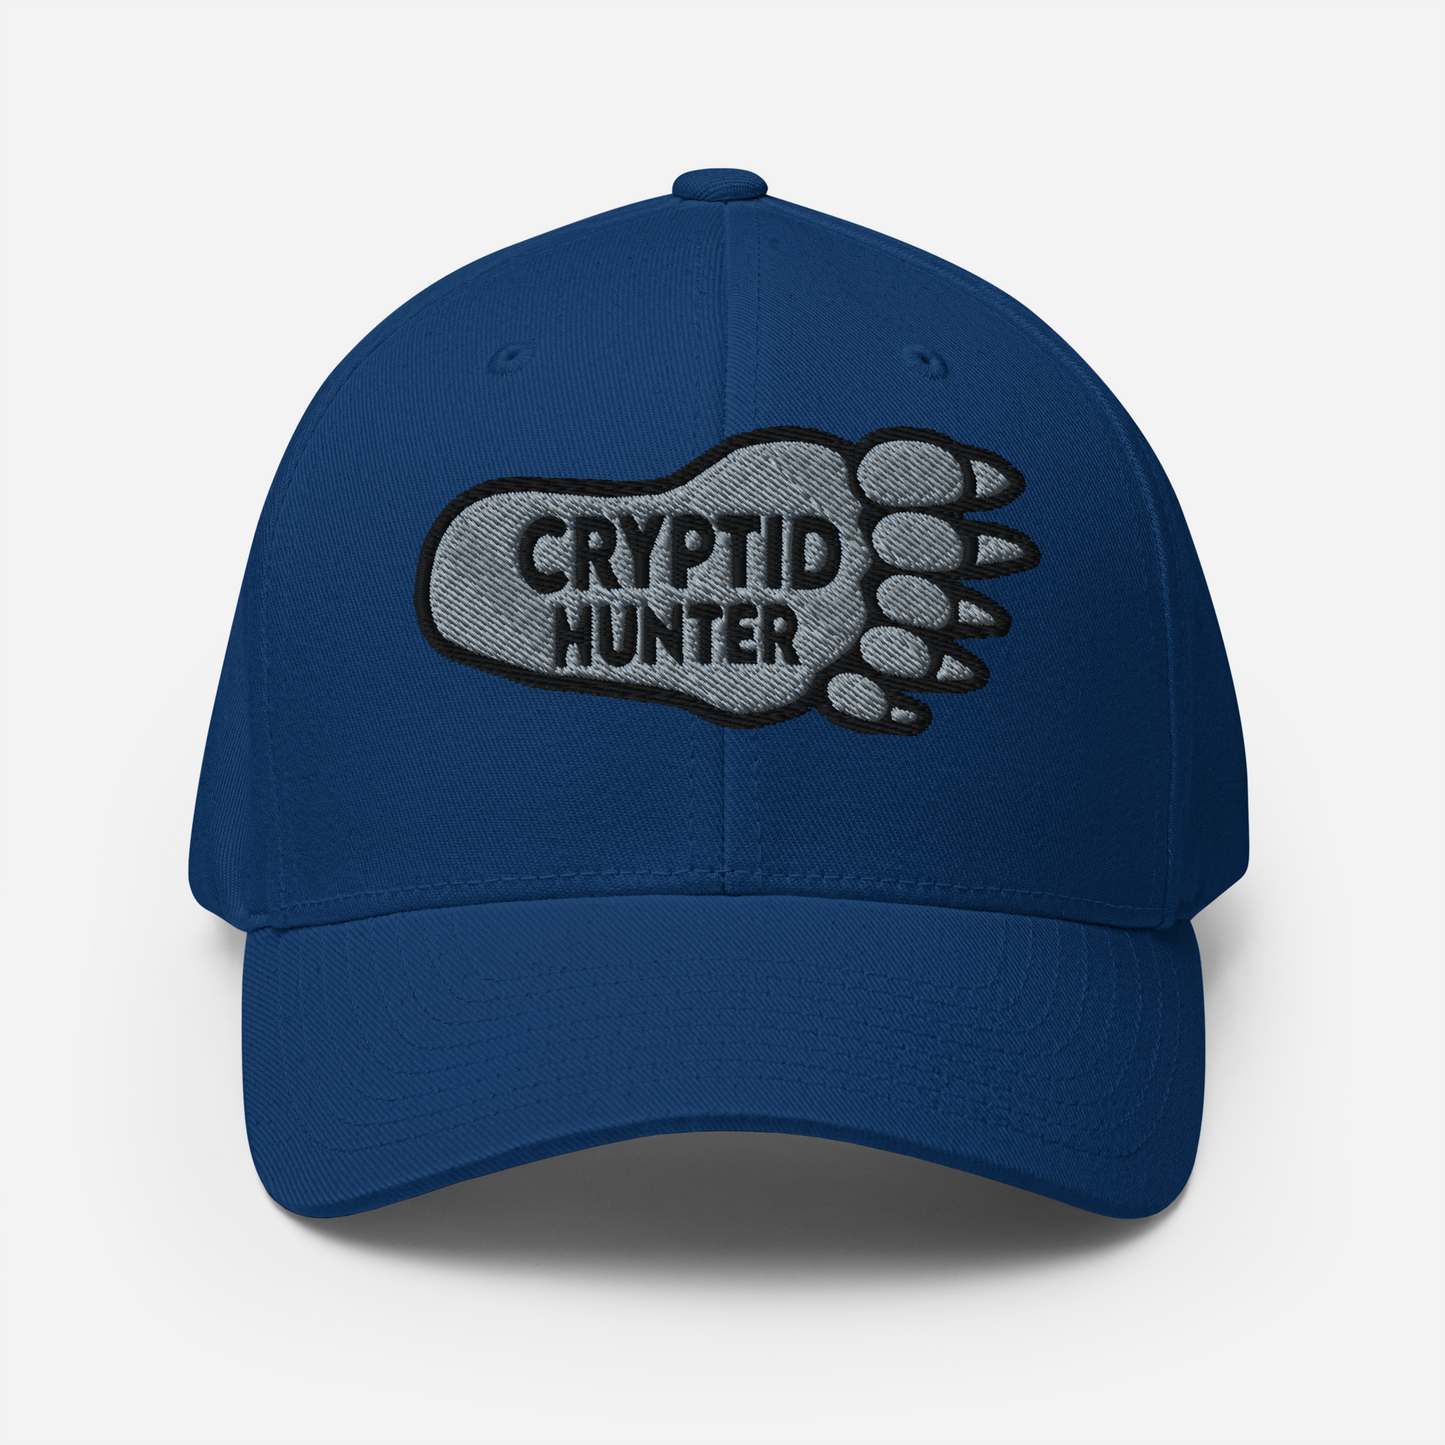 Royal Blue Cryptid Hunter Structured Twill Cap cryptidcurosities